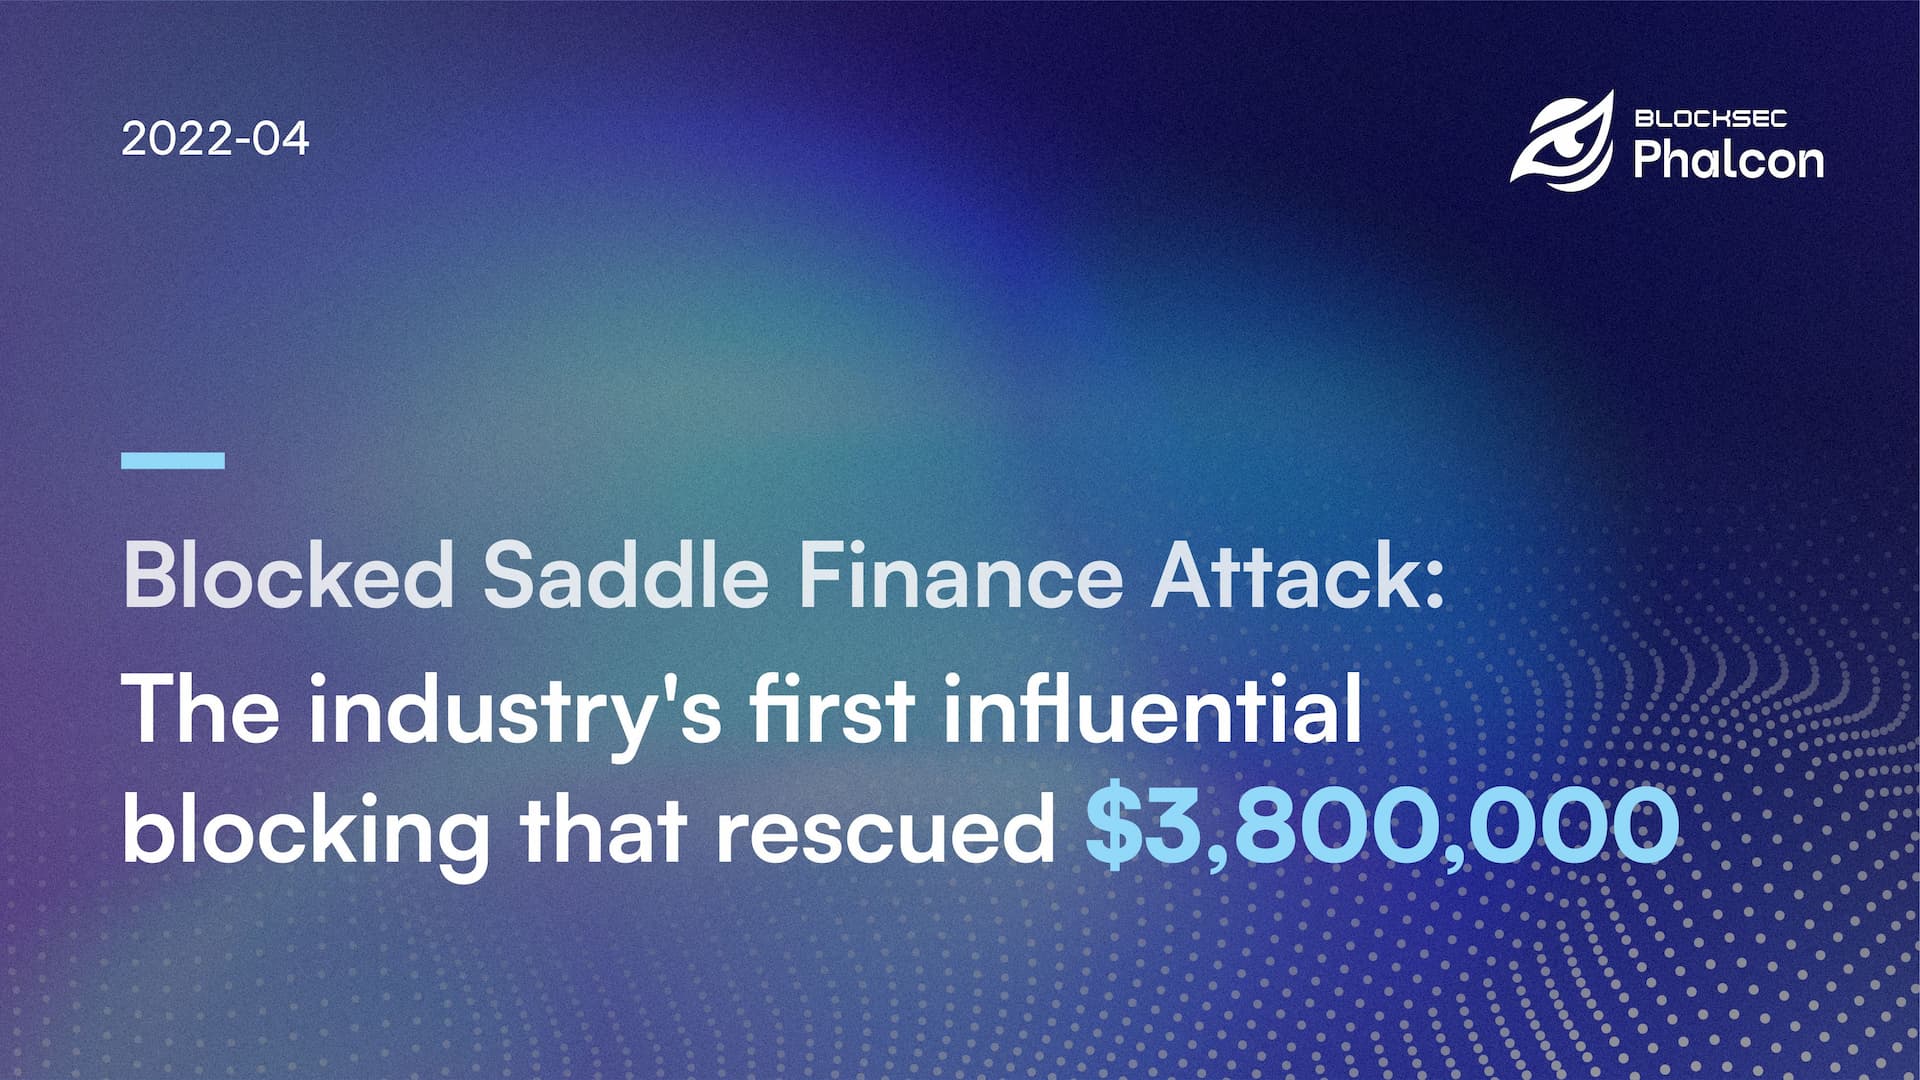 #3 Blocked Saddle Finance Attack: Industry's First Influential Blocking to Rescue $3,800,000